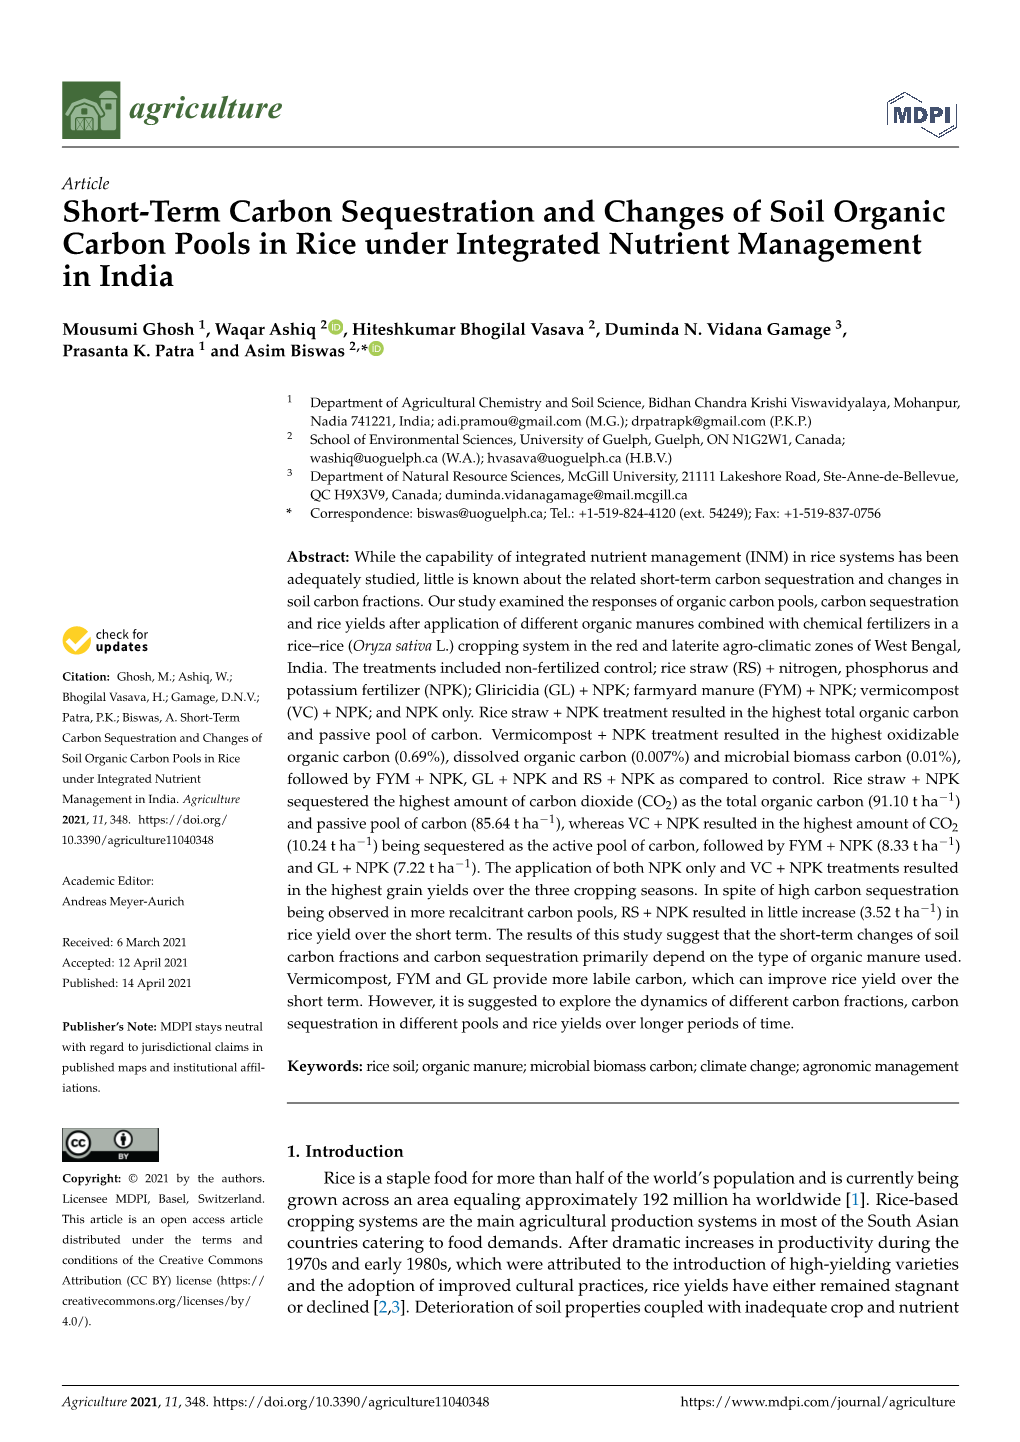 Short-Term Carbon Sequestration and Changes of Soil Organic Carbon Pools in Rice Under Integrated Nutrient Management in India